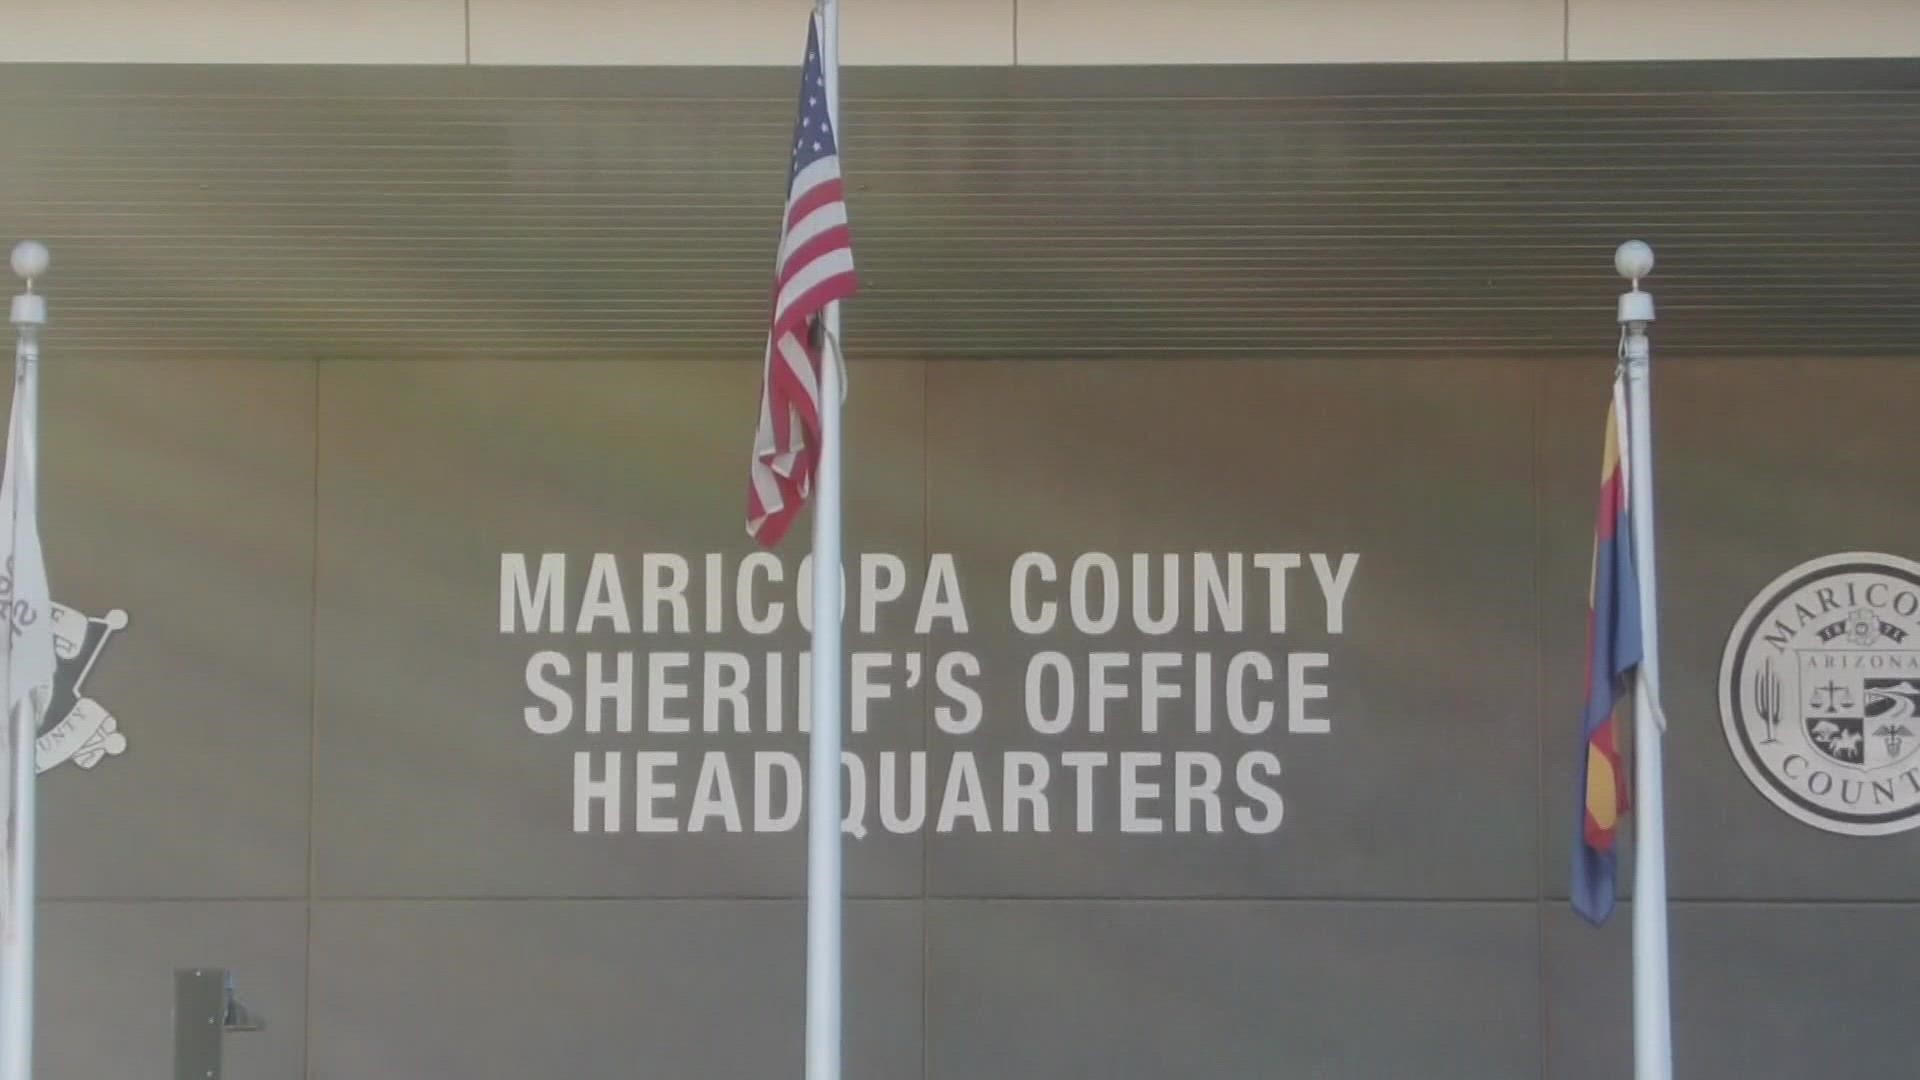 Maricopa County Sheriff Paul Penzone said 17 inmates died in drug-related incidents in 2022, which is a jump from the three deaths reported in 2018.